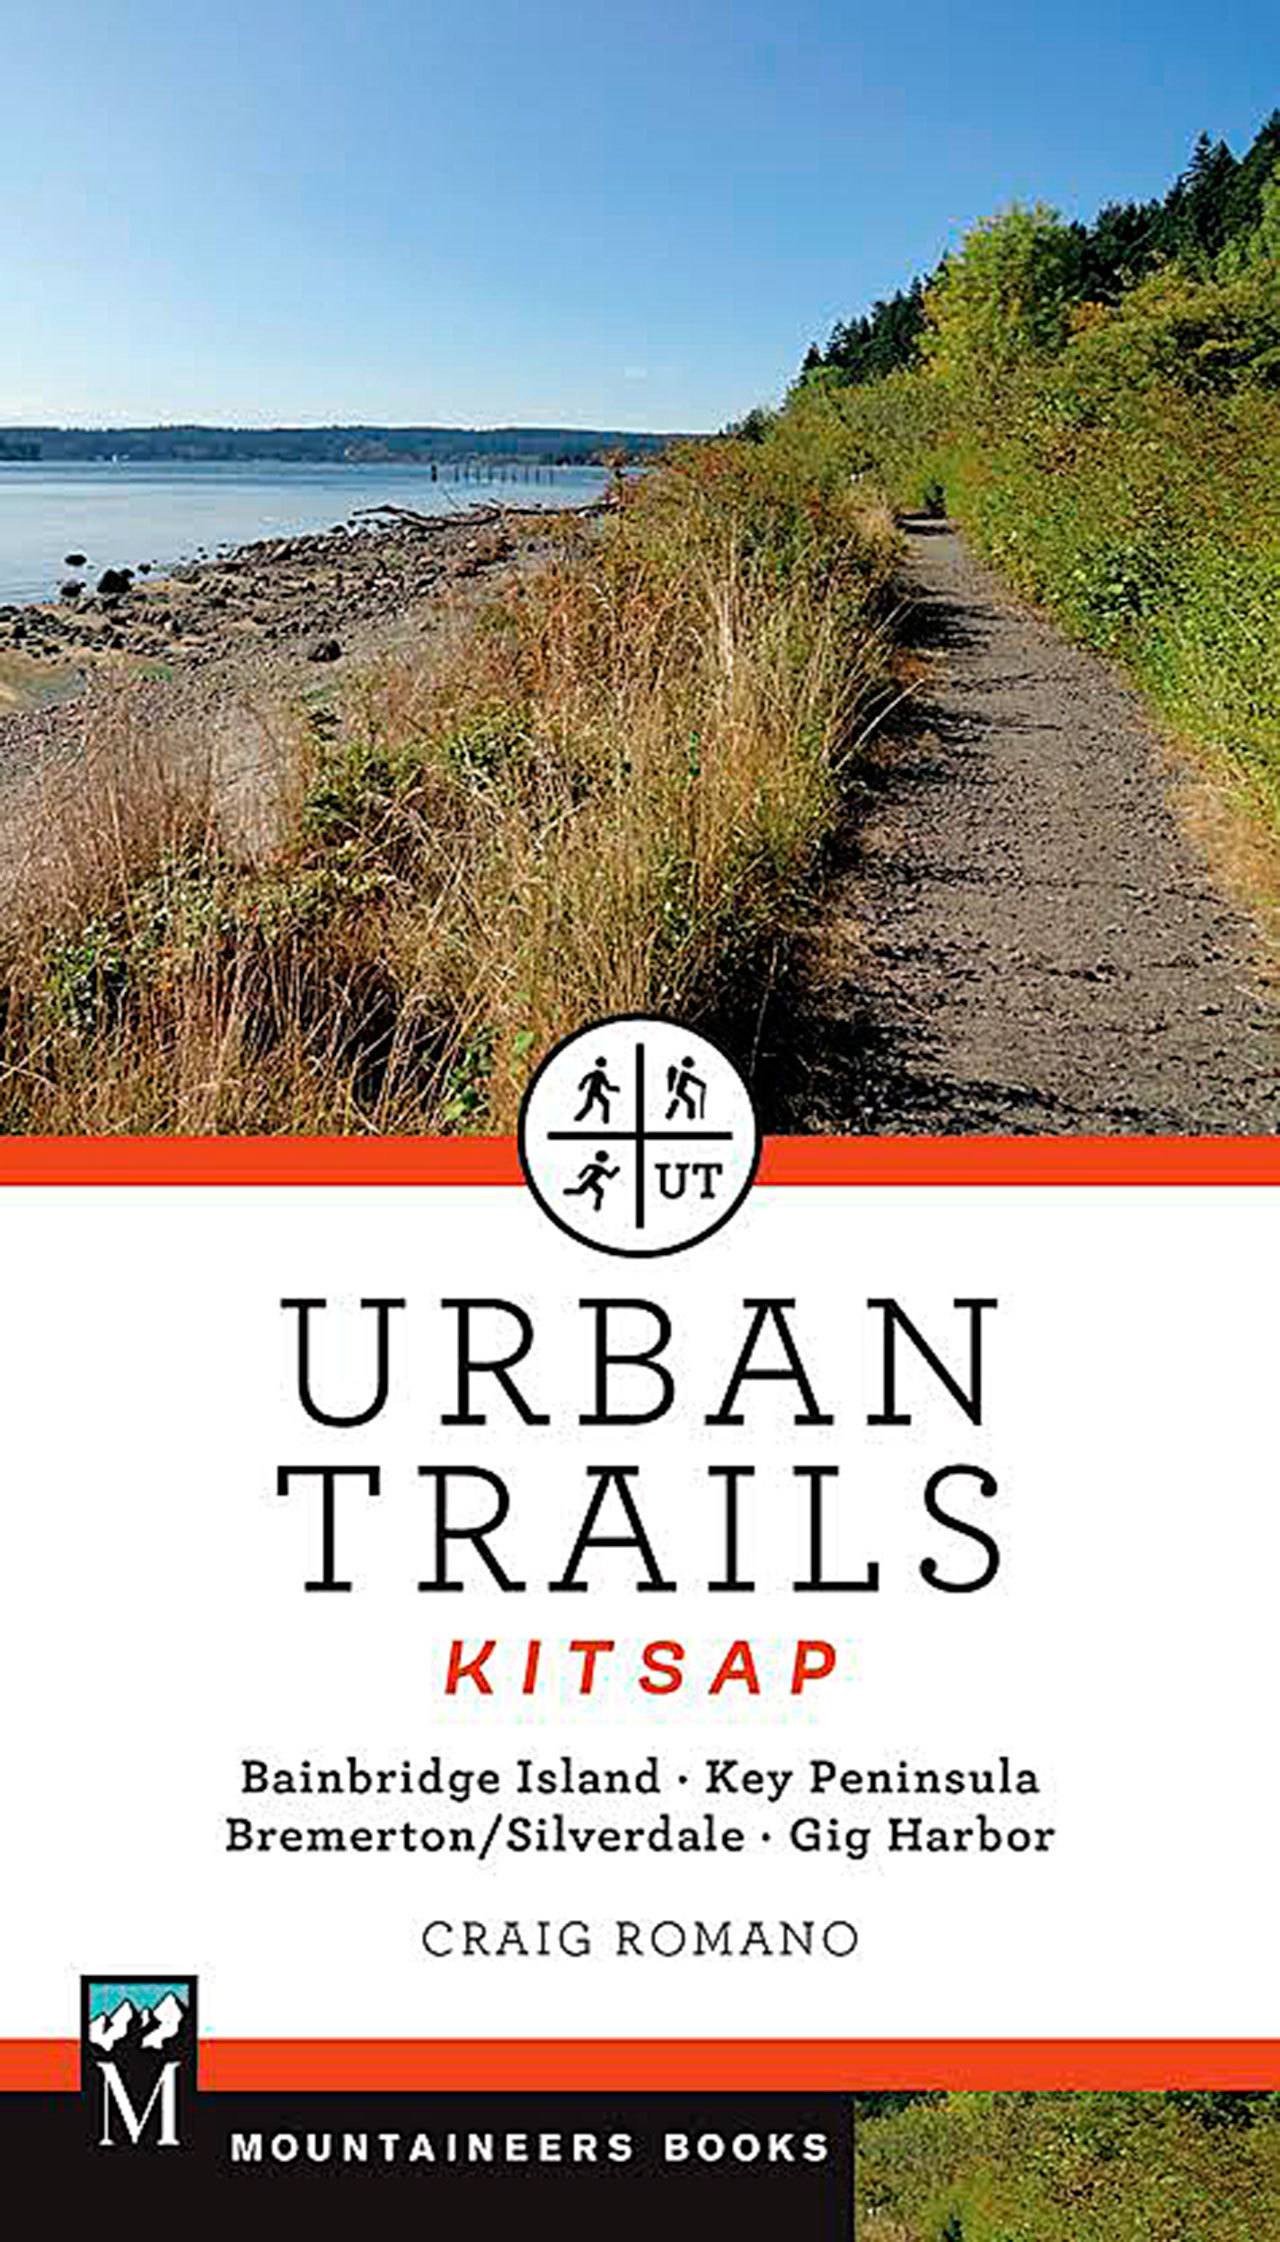 “Urban Trails: Kitsap” was published in the fall and is available at bookstores and online. Romano plans to write seven books in the urban series. The other books will focus on trails around Olympia, Everett, Seattle, Tacoma, Bellevue and Bellingham.
